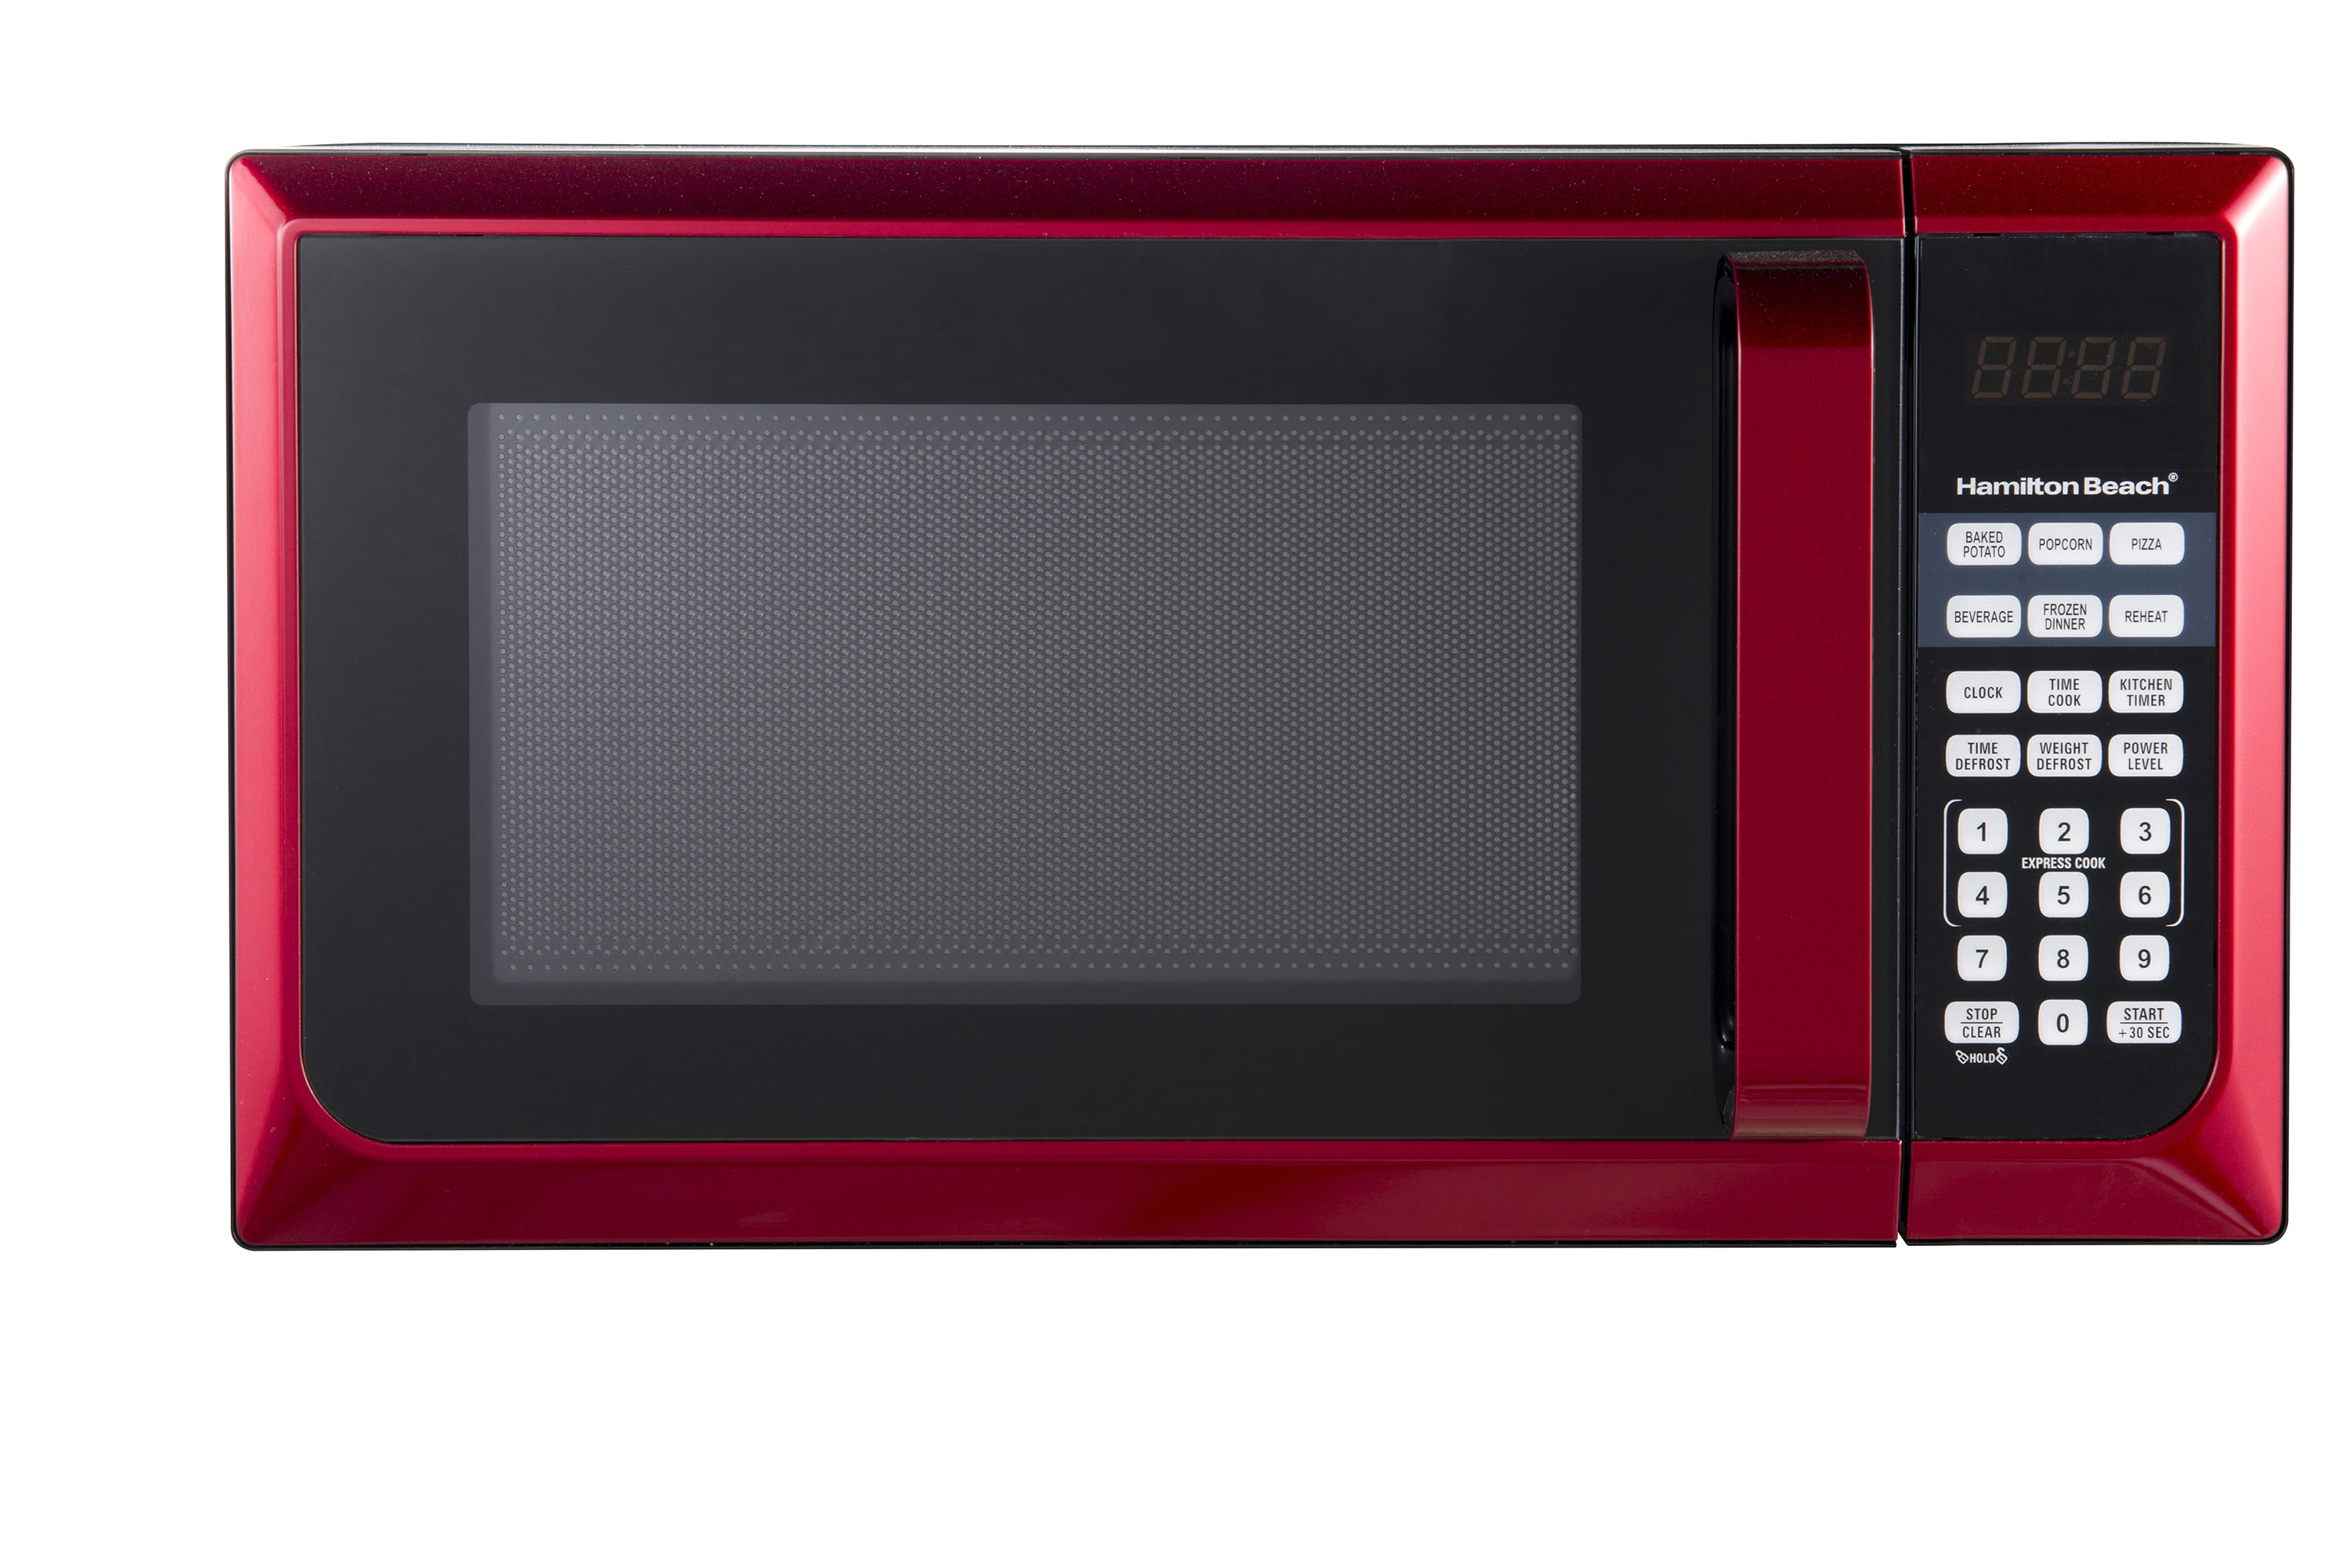 Microwave Oven Countertop Stainless Steel New Small 0.9 cu.ft Red 